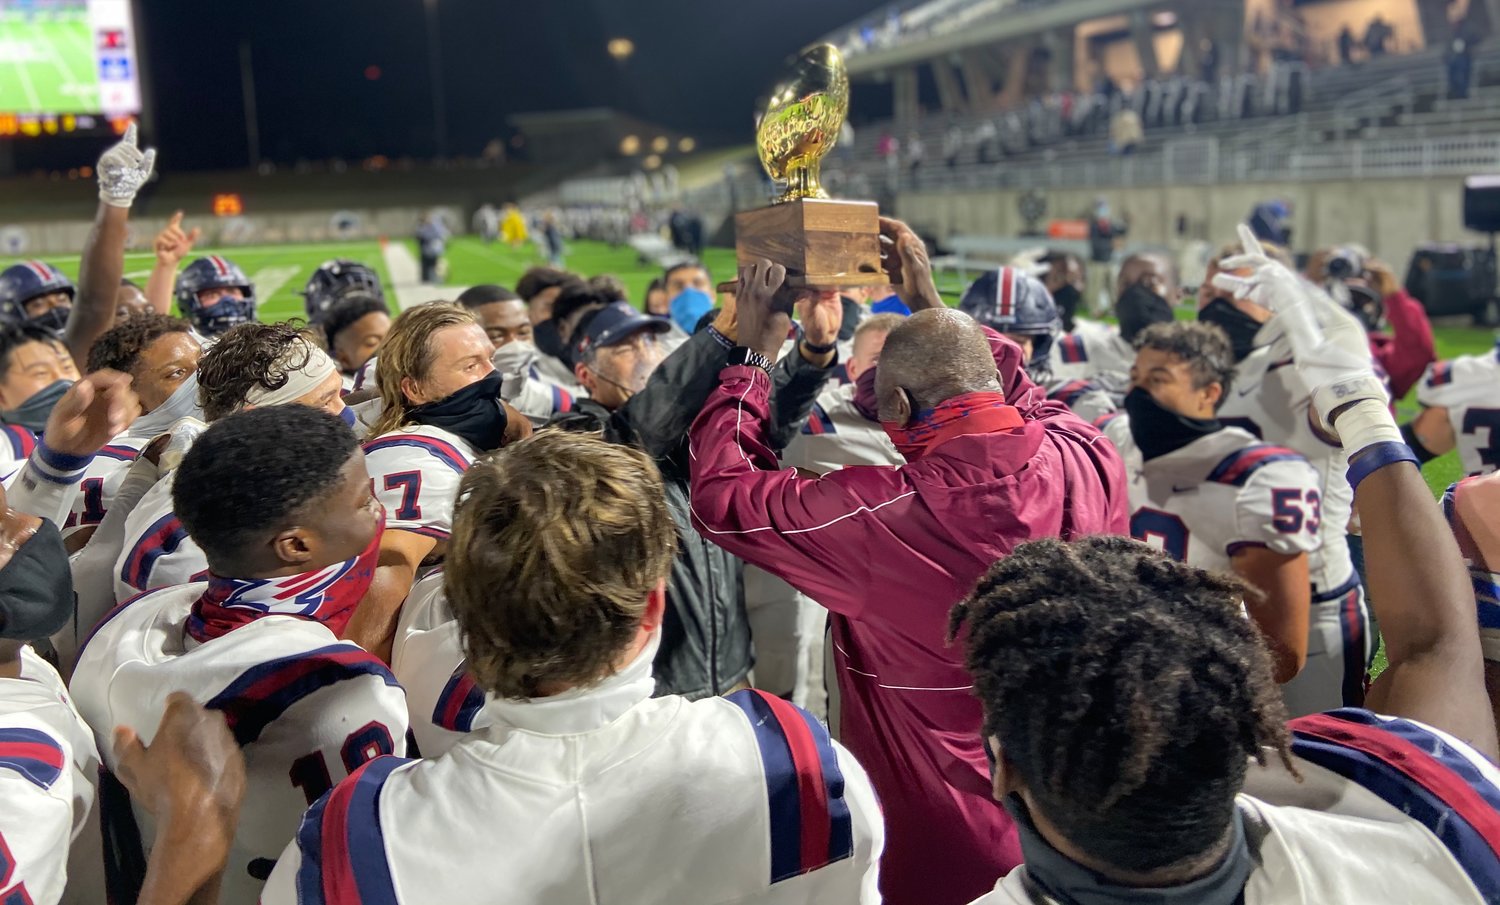 Tompkins head coach Todd McVey, in grey, hands off the district championship trophy to school namesake O.D. Tompkins, in crimson red, following the Falcons' win over Seven Lakes on Nov. 27.